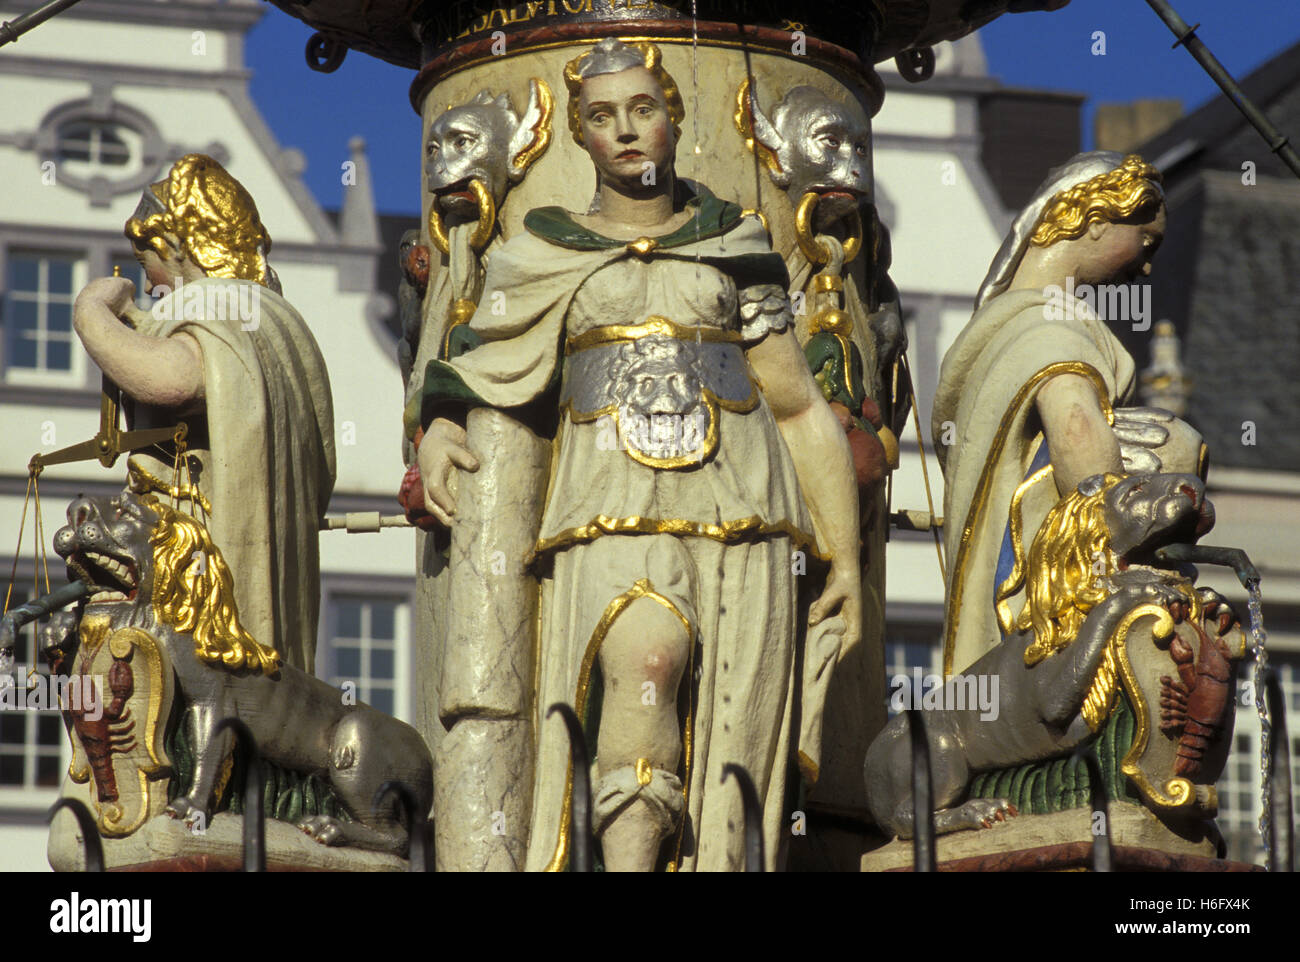 Germany, Trier, the Petrus fountain at the main market square. Stock Photo